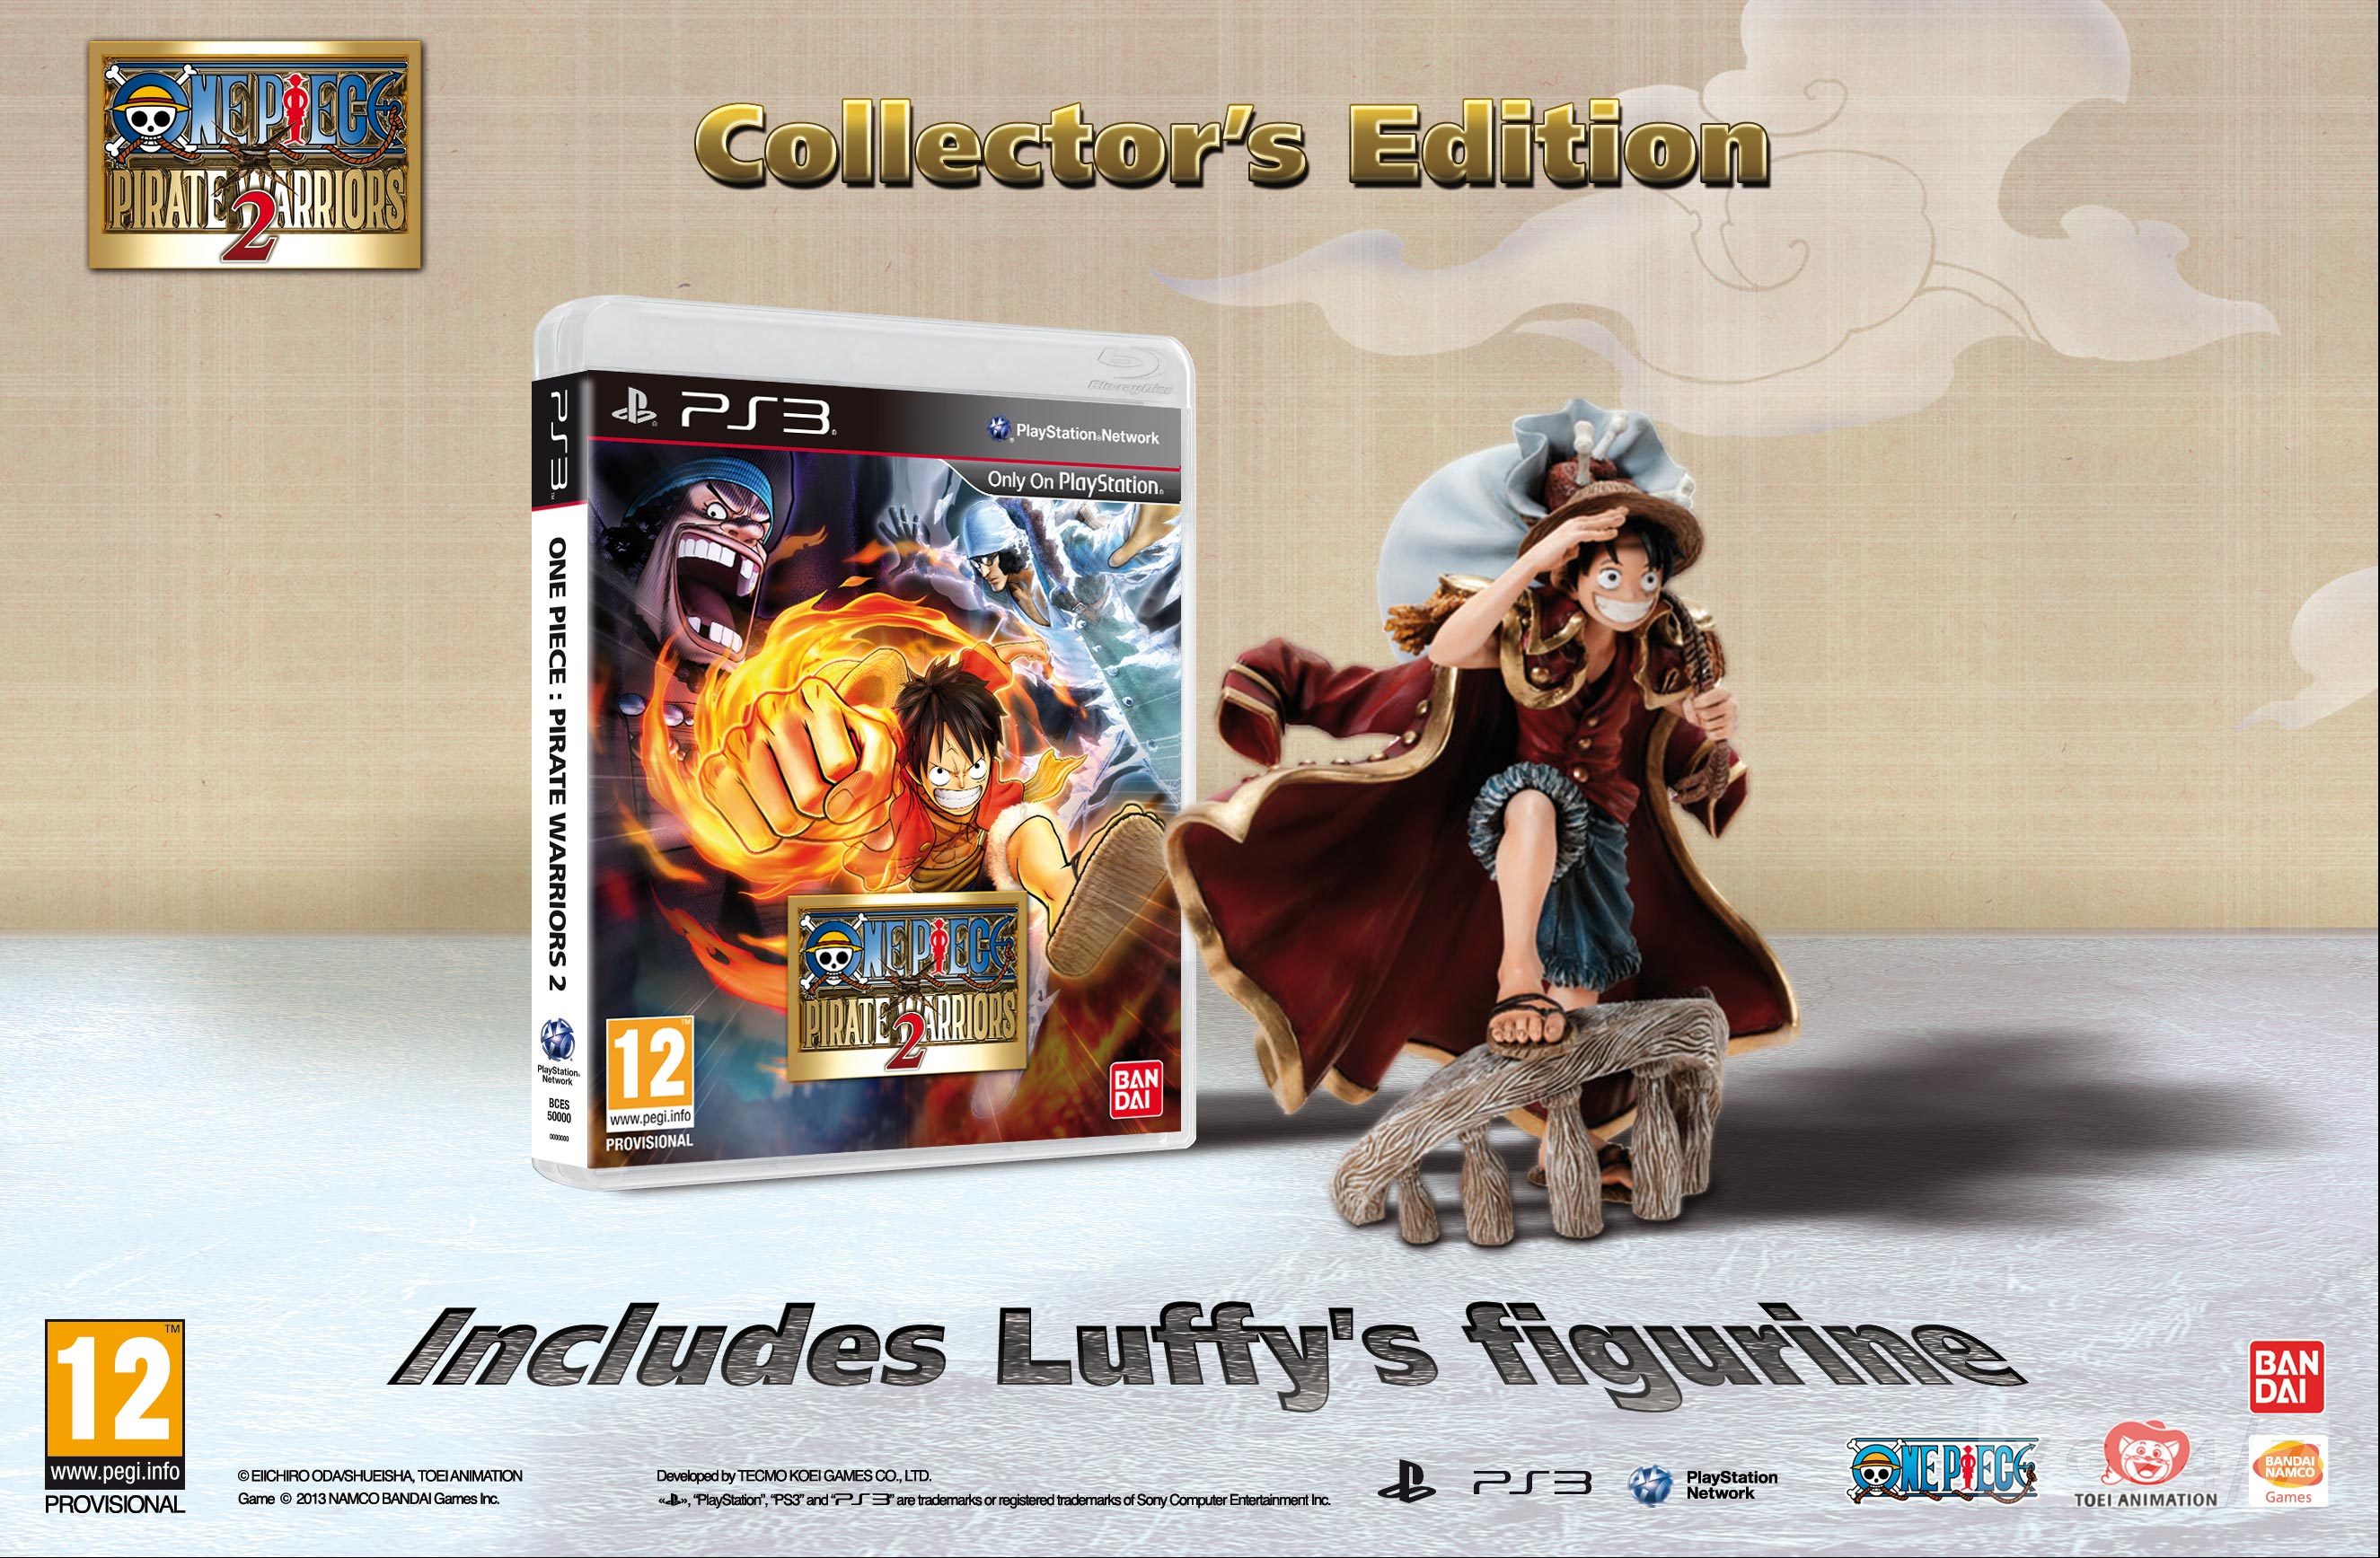 Special Edition di One Piece: Pirate Warriors 2